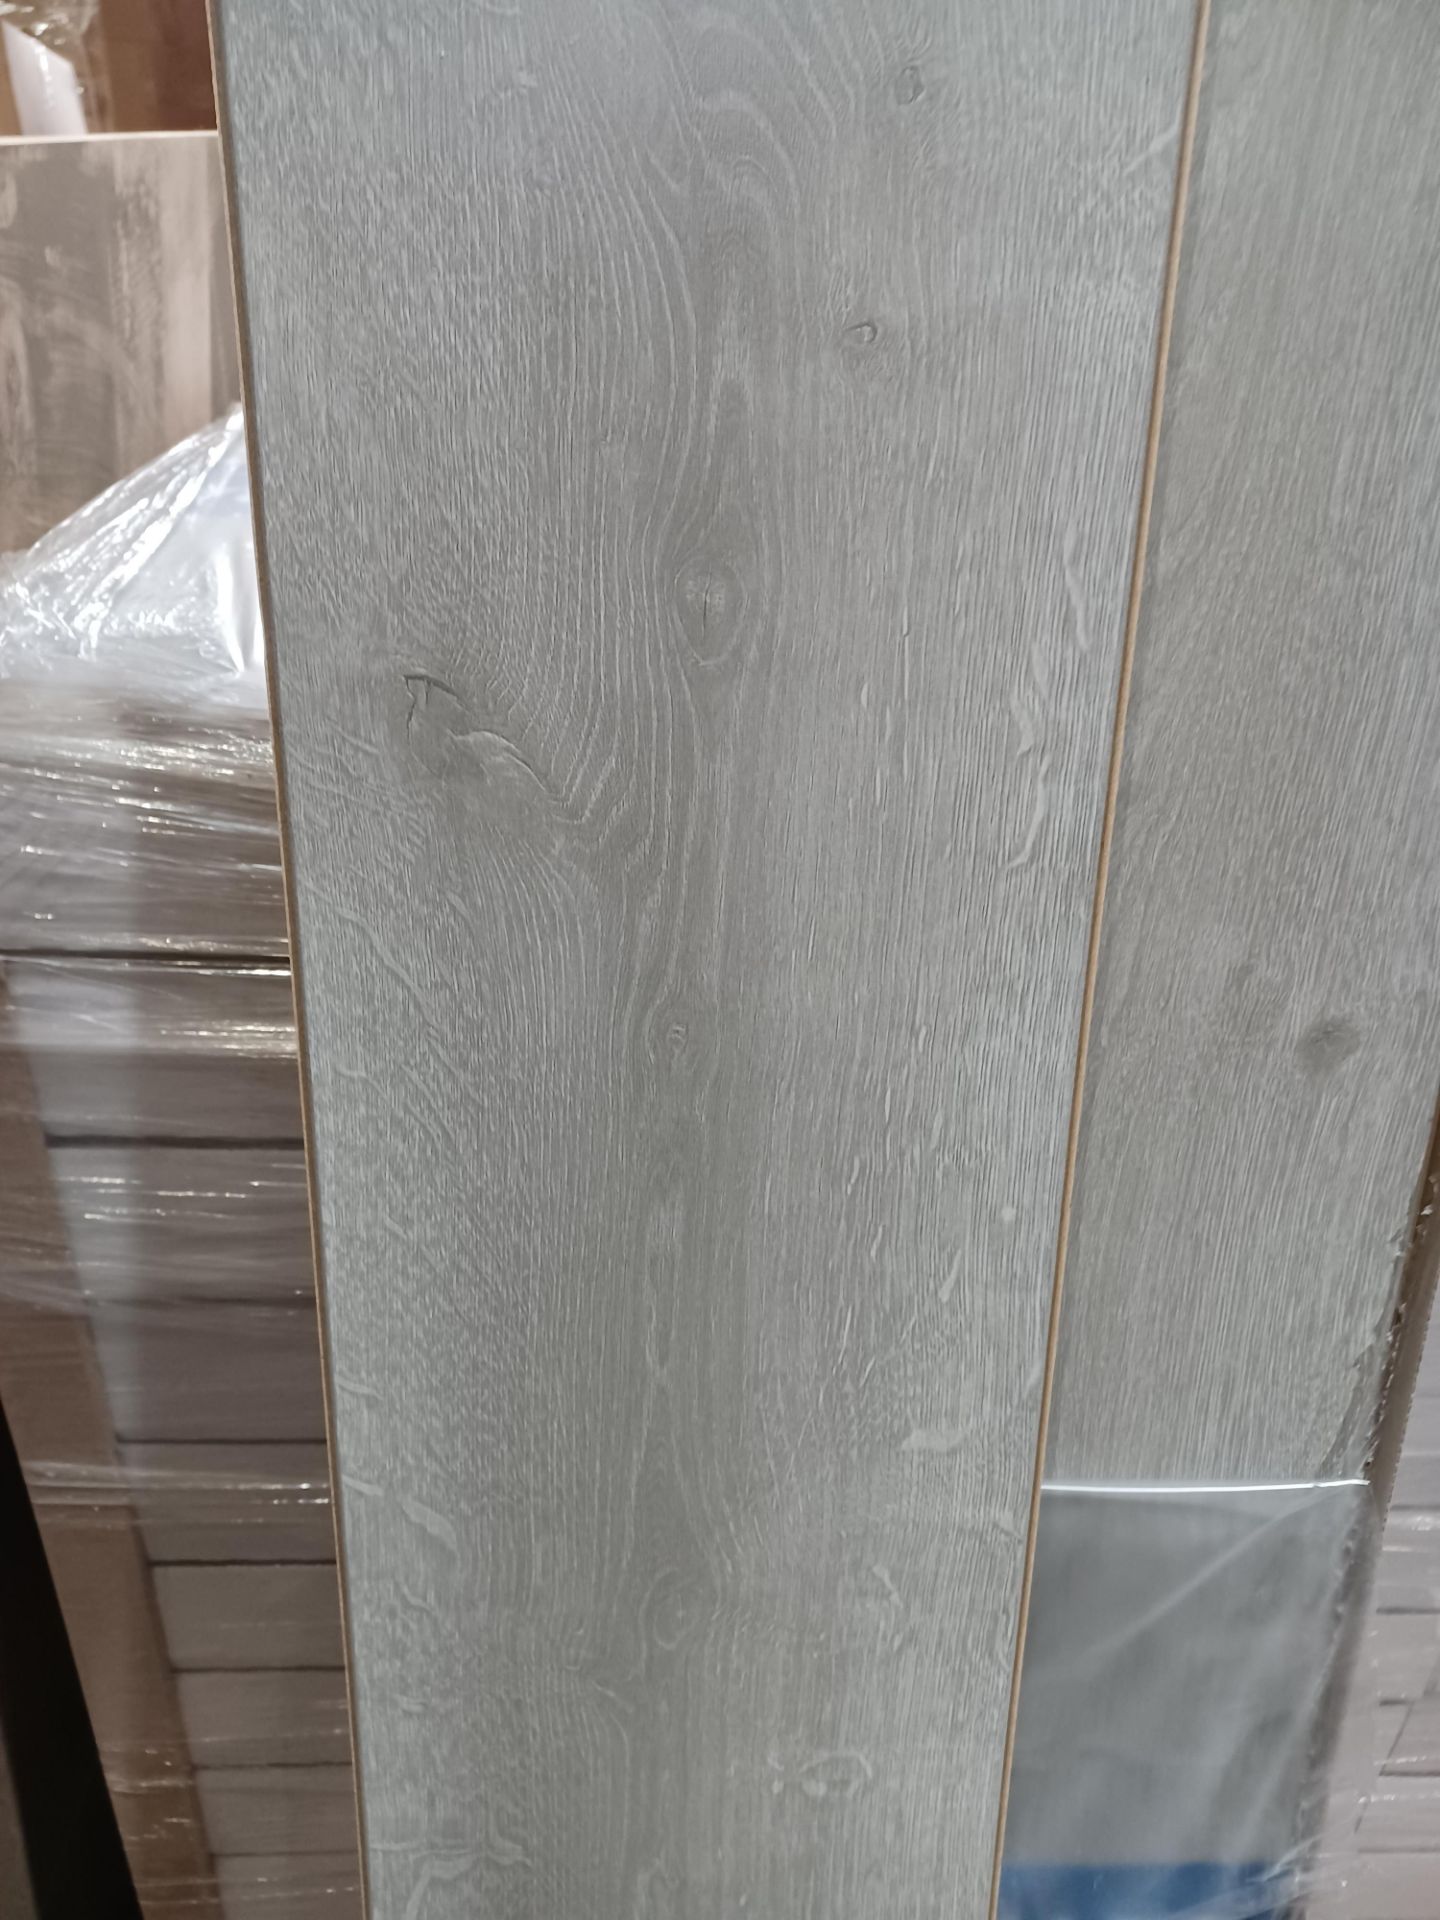 PALLET TO CONTAIN 52 x NEW SEALED PACKS OF NIAGRA MONTANA GREY OAK EFFECT PREMIUM WATER RESISTANT - Image 2 of 4